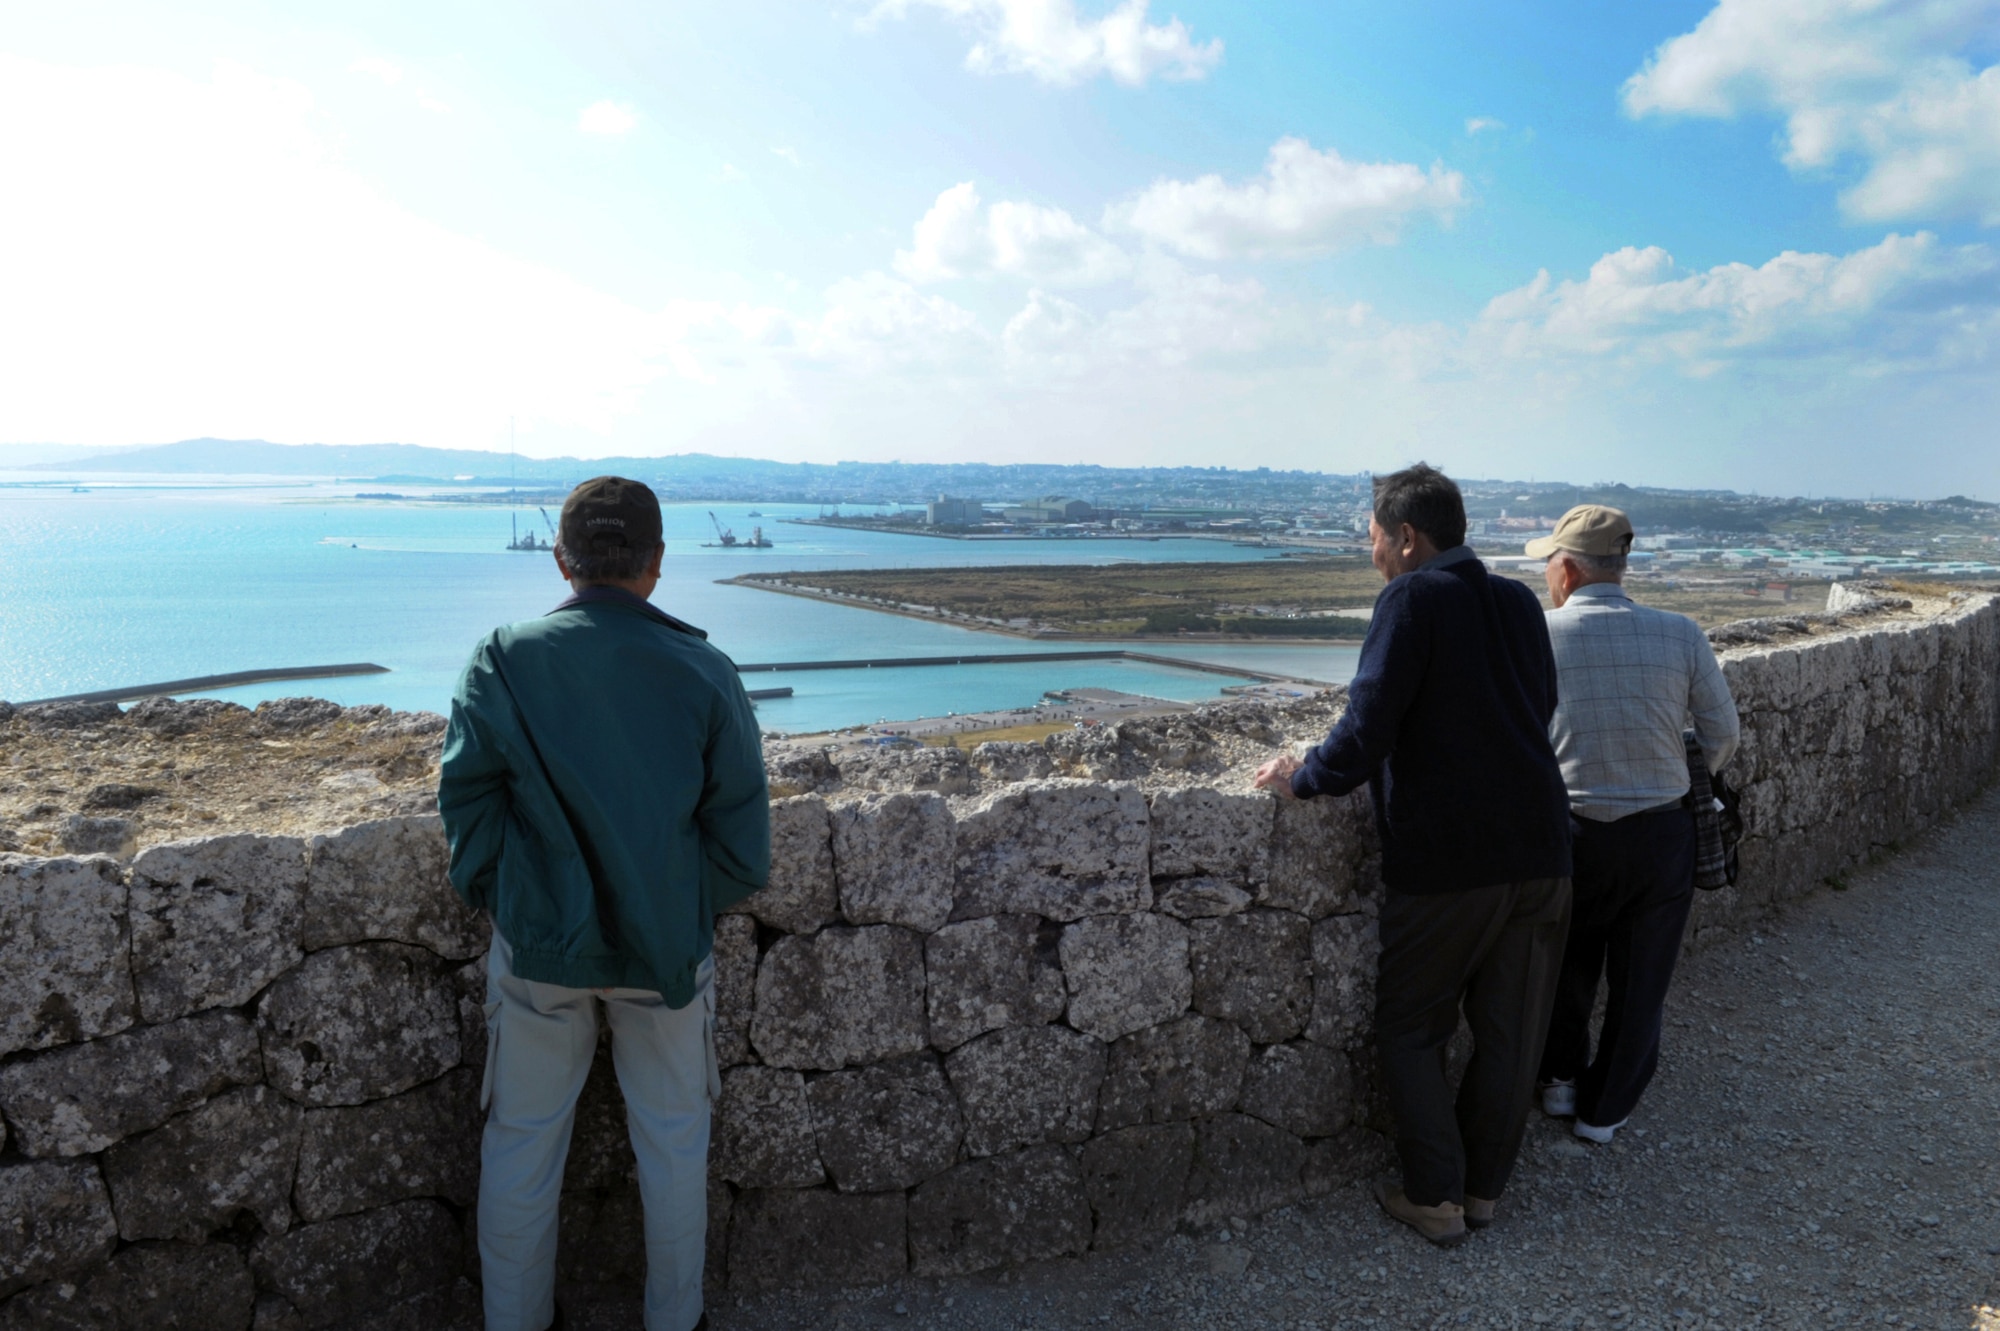 Visitors look out at the view from the top of the Katsuren Castle ruins on Okinawa, Japan, on Jan. 25, 2015.  The castle, which dates back to the 13th century, was added to the World Heritage List in 2000. (U.S. Air Force photo by Tim Flack)